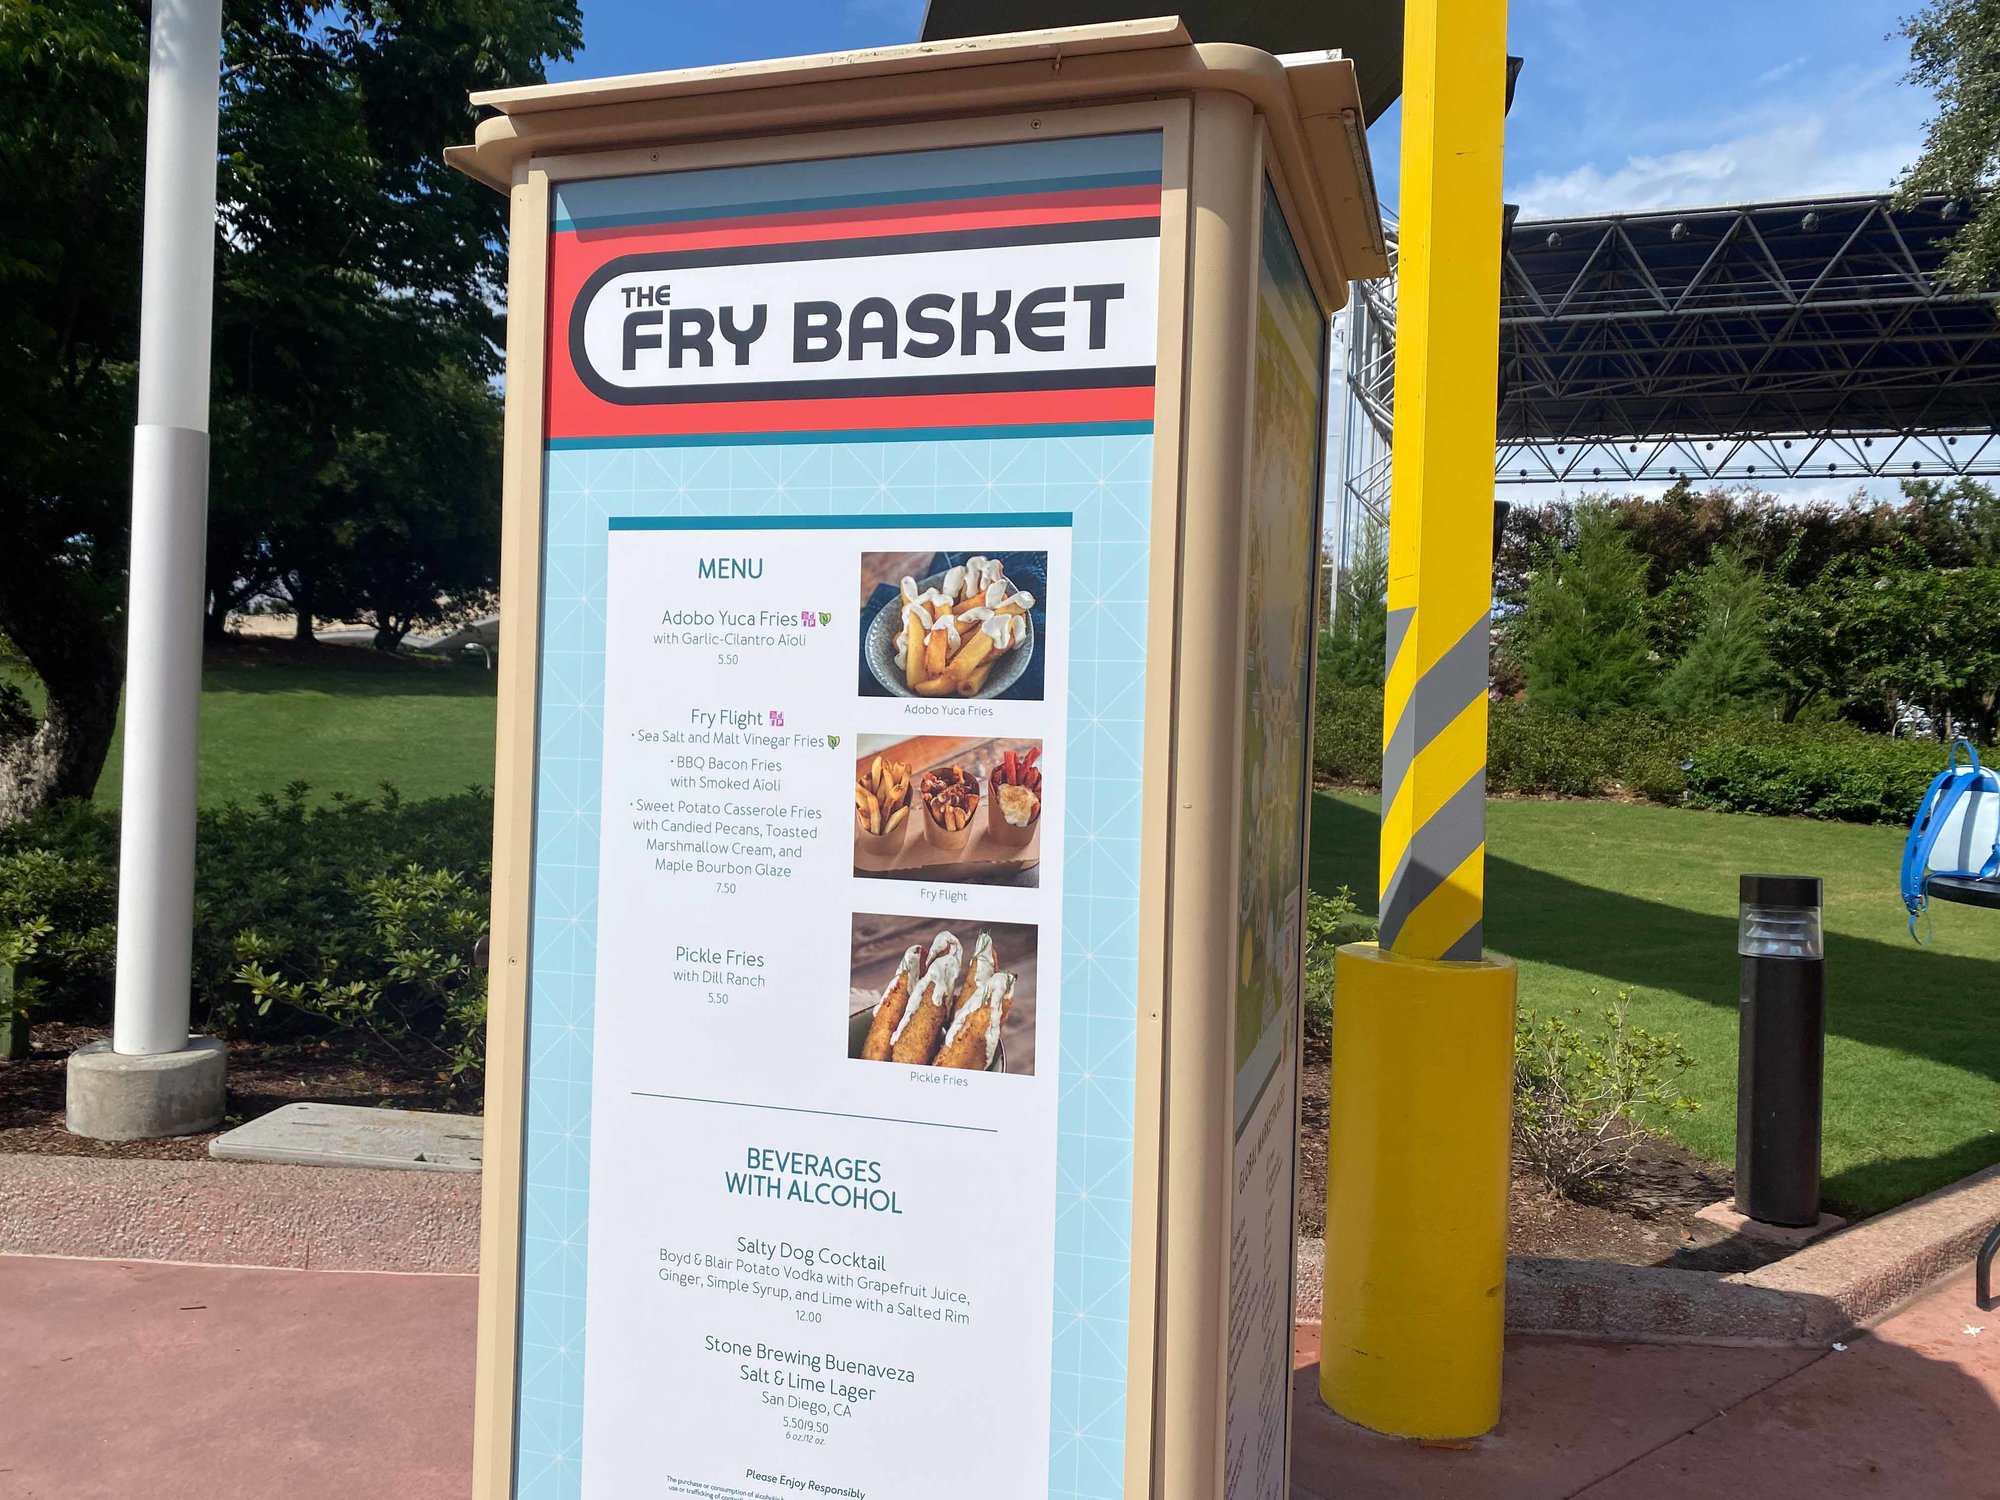 fry basket menu with black rounded text and red and blue background